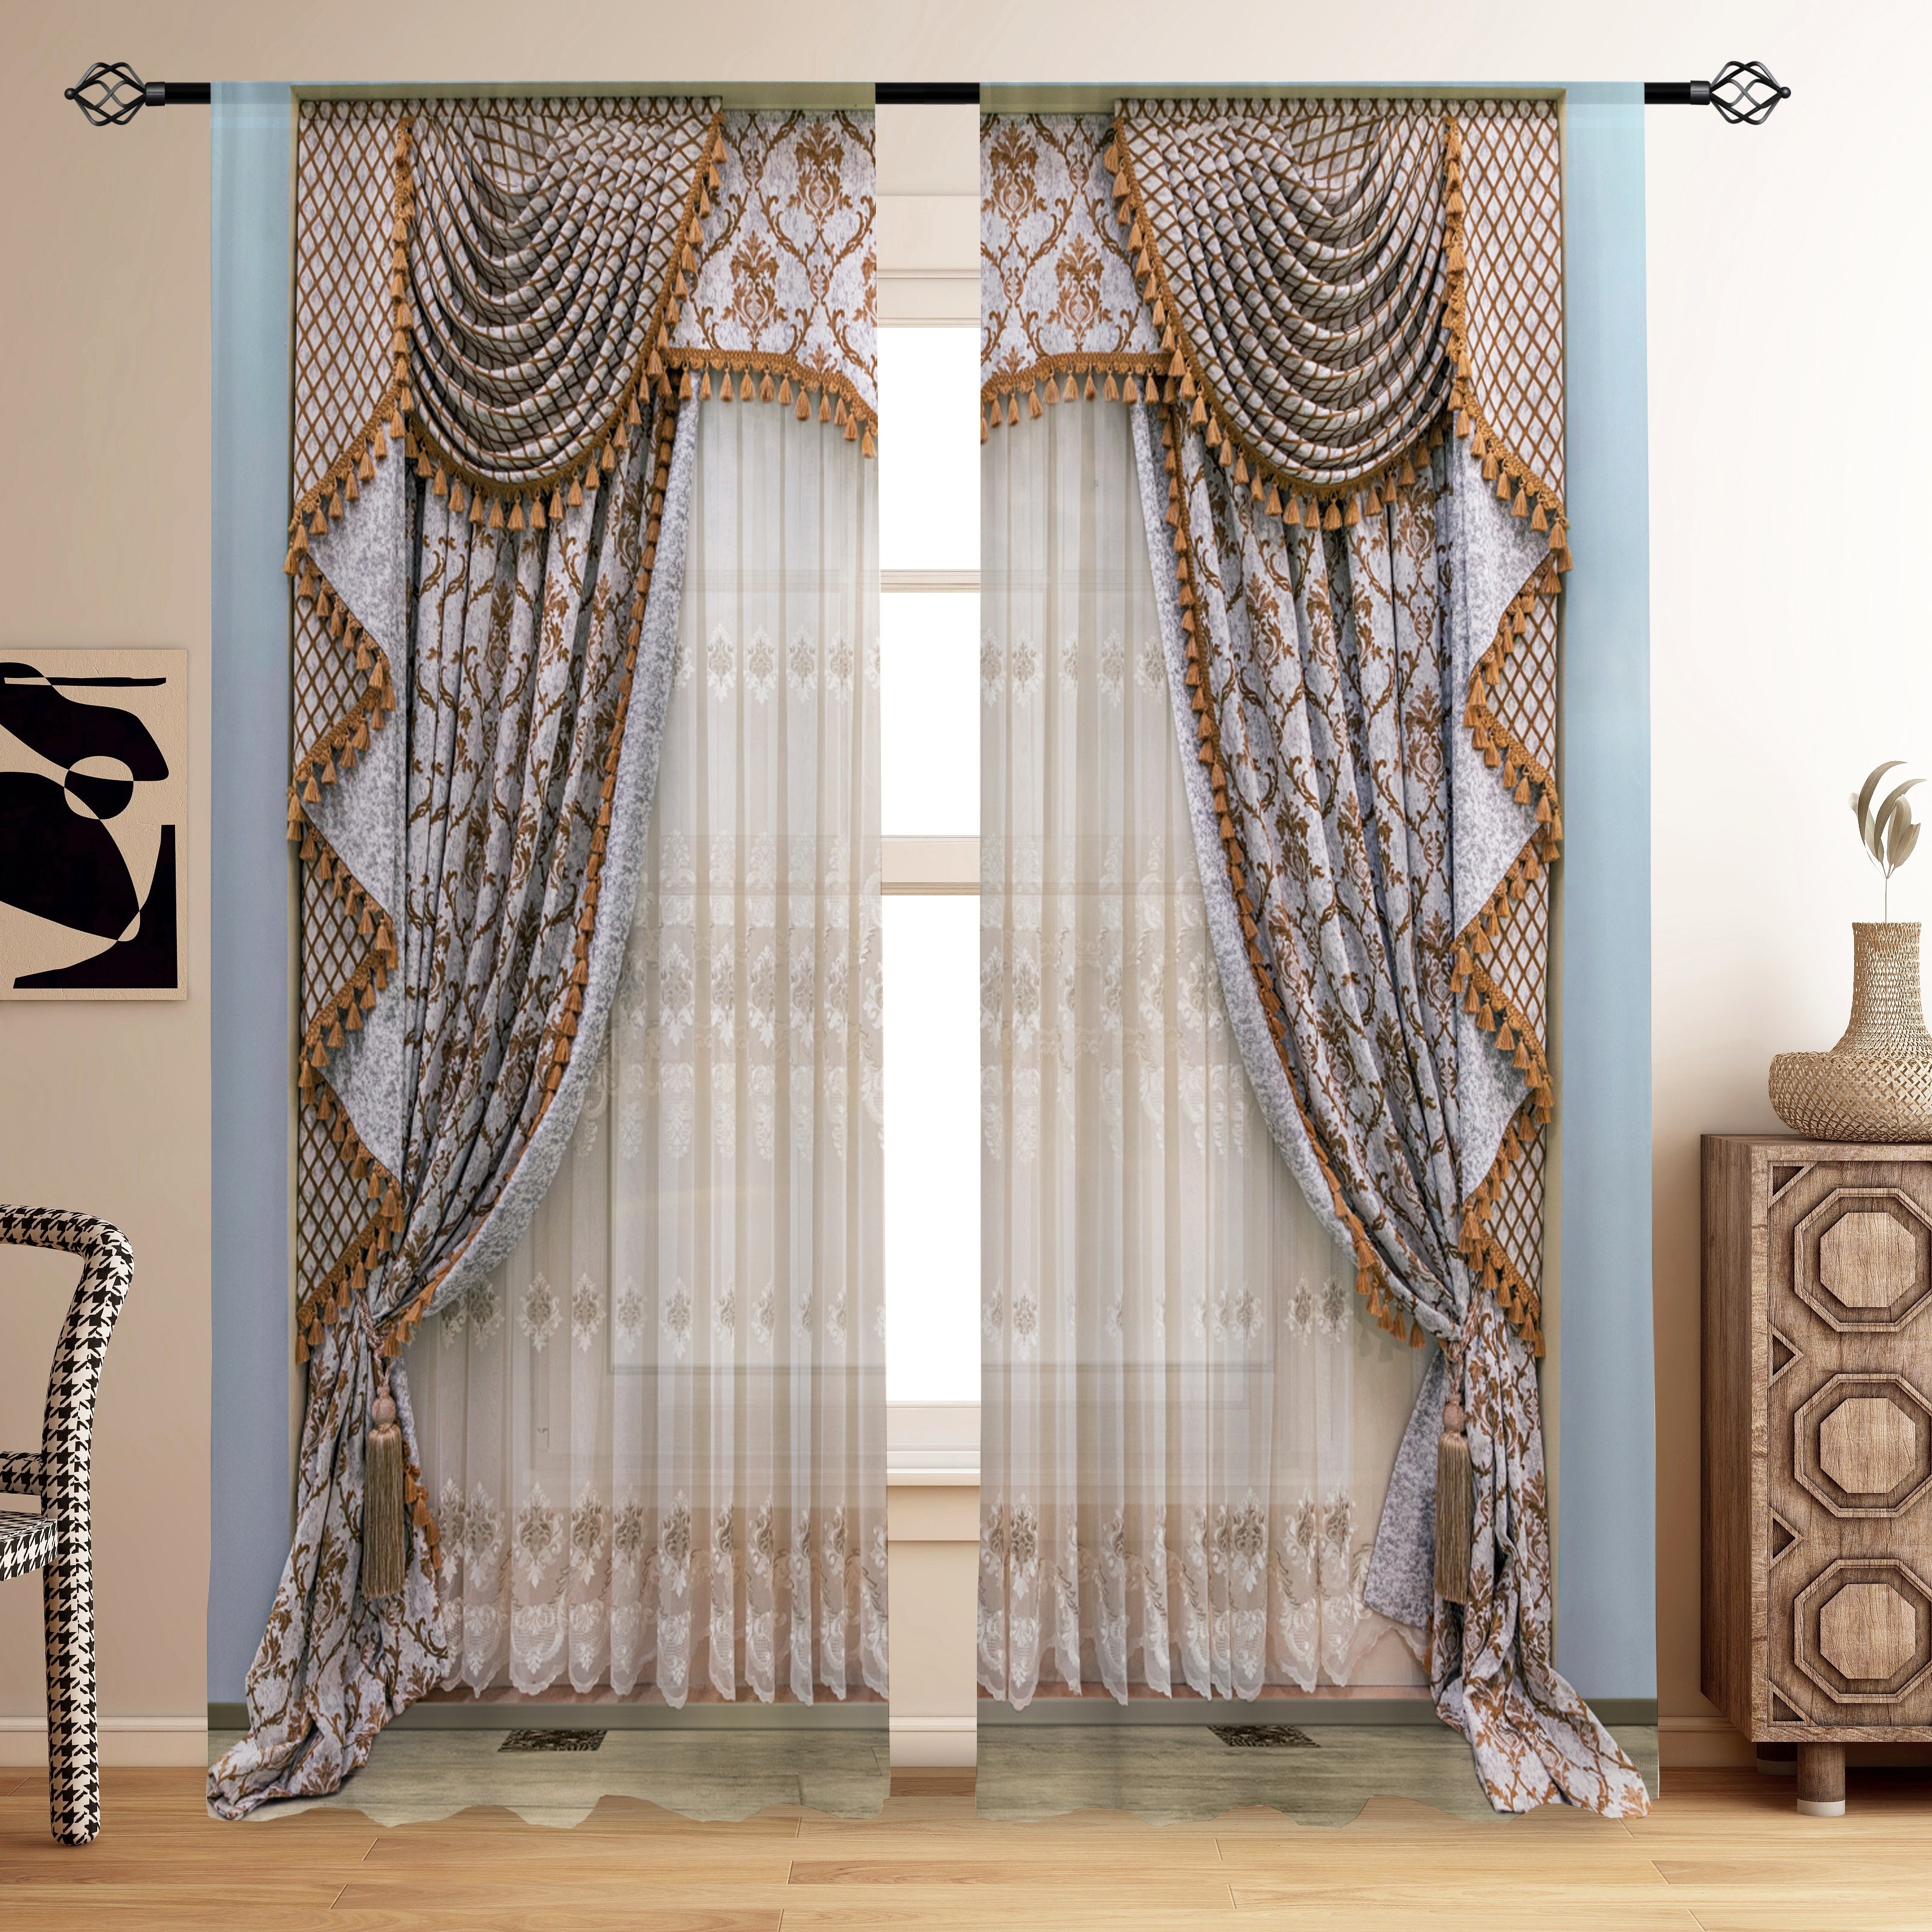 Latest Curtain Trends: How to Choose curtains for Home